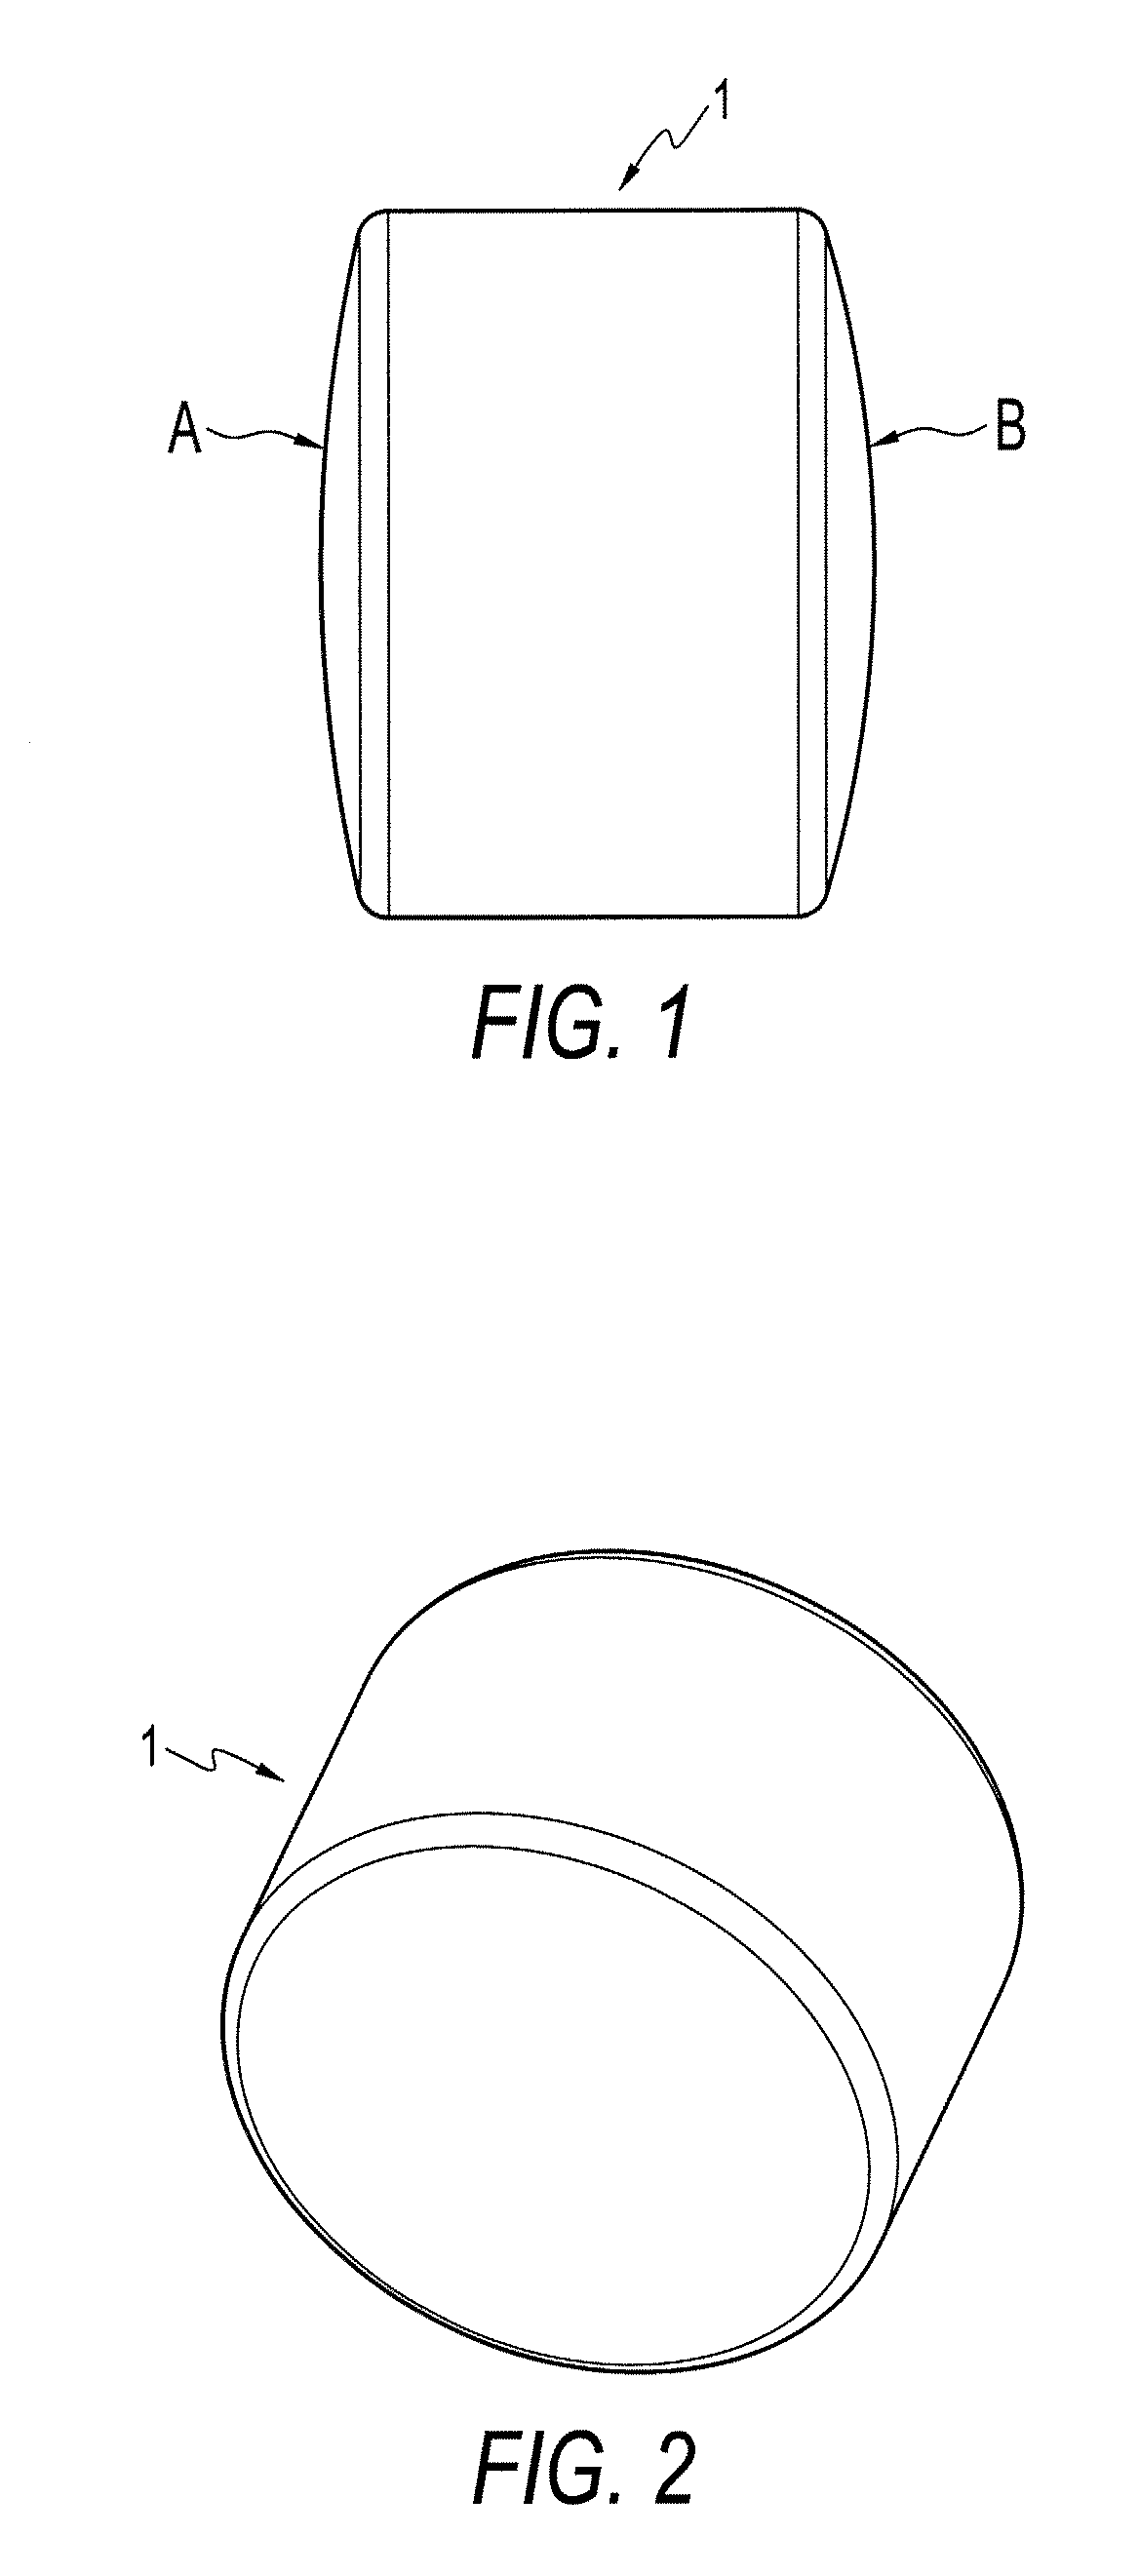 Method and instrumentation for osteochondral repair using preformed implants